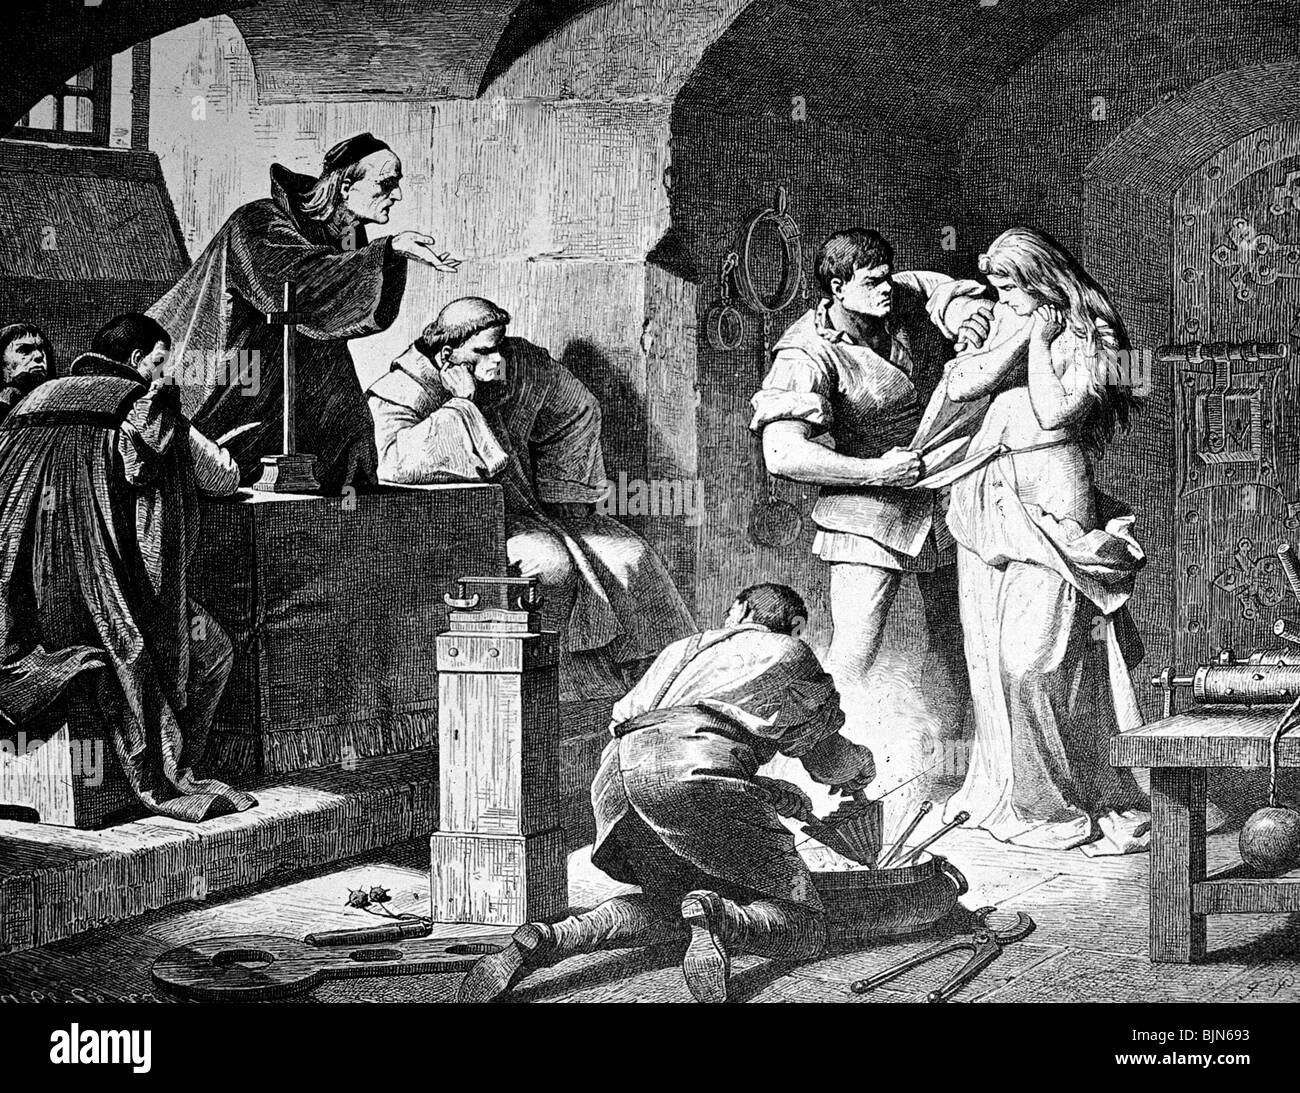 witches, witch hunting era, interrogation of a witch by the inquisition, illustration from the 19th century, historic, historical, torture chamber, torturer, clergyman, judiciary, people, Stock Photo